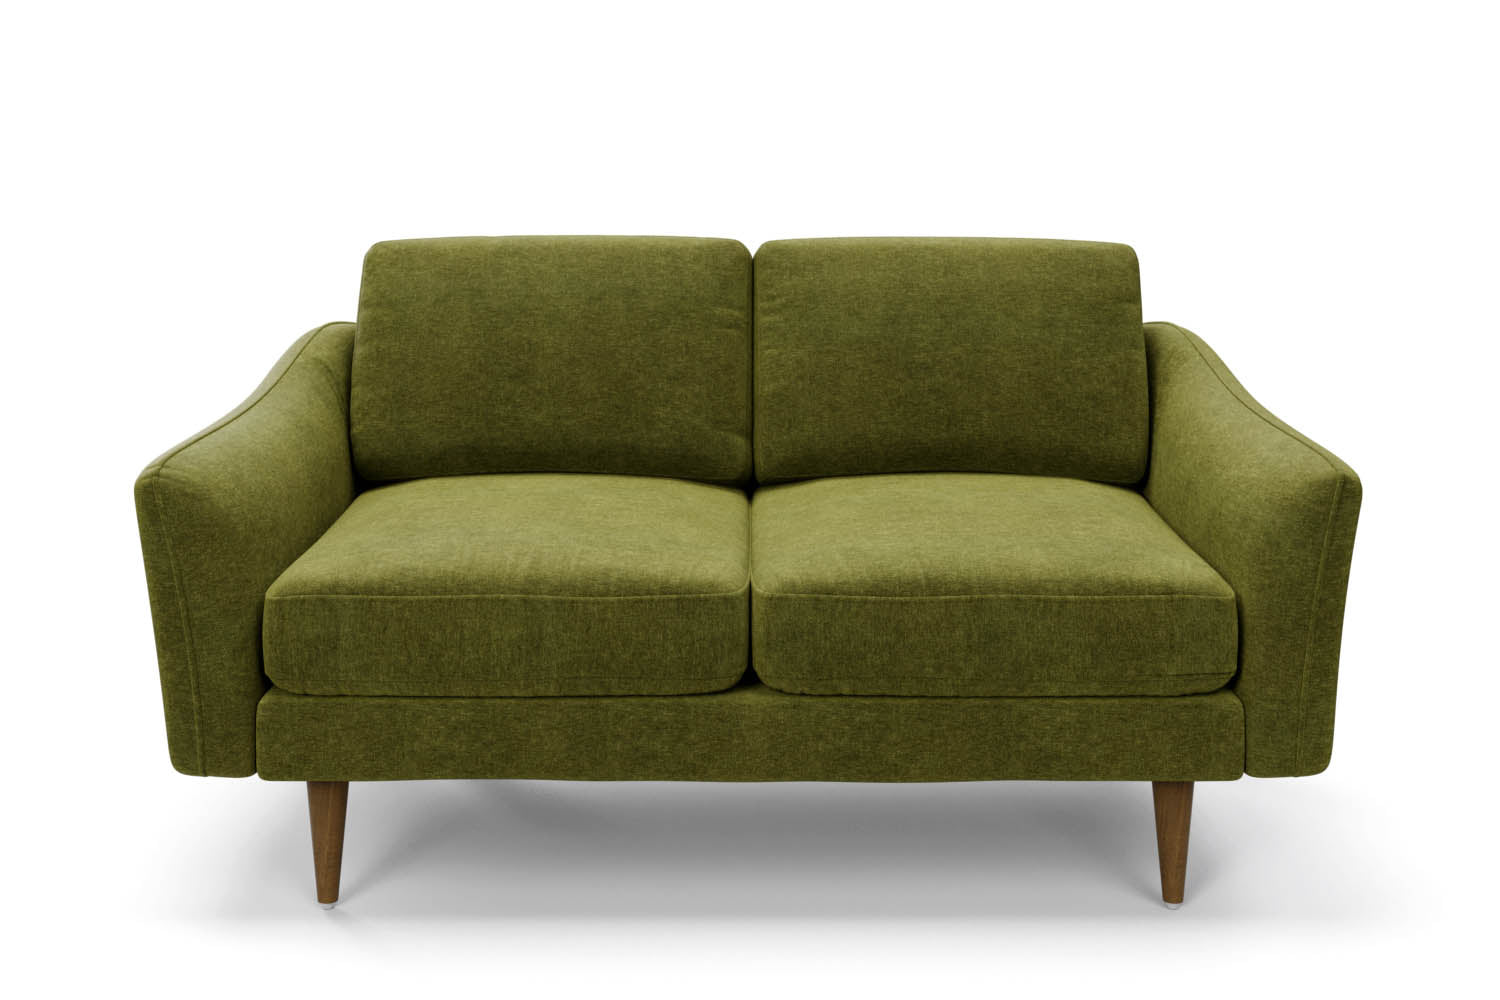 The Rebel 2 Seater Sofa in Moss with brown legs front variant_40886298017840